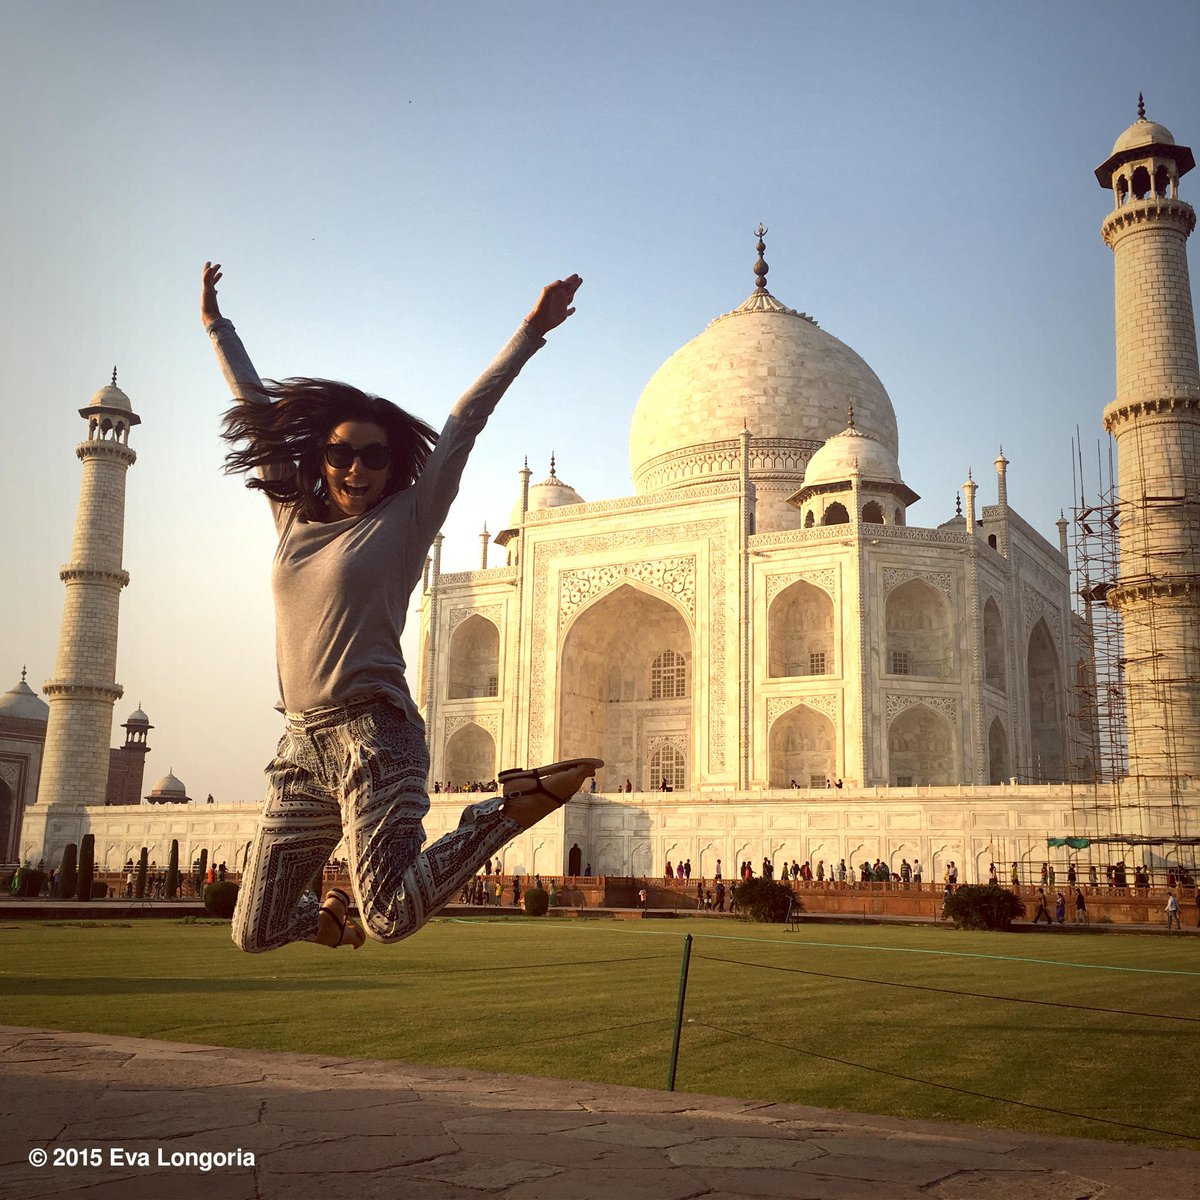 Can't leave Agra without a jumping photo in front of Taj Mahal! https://t.co/quKAhy2dPy